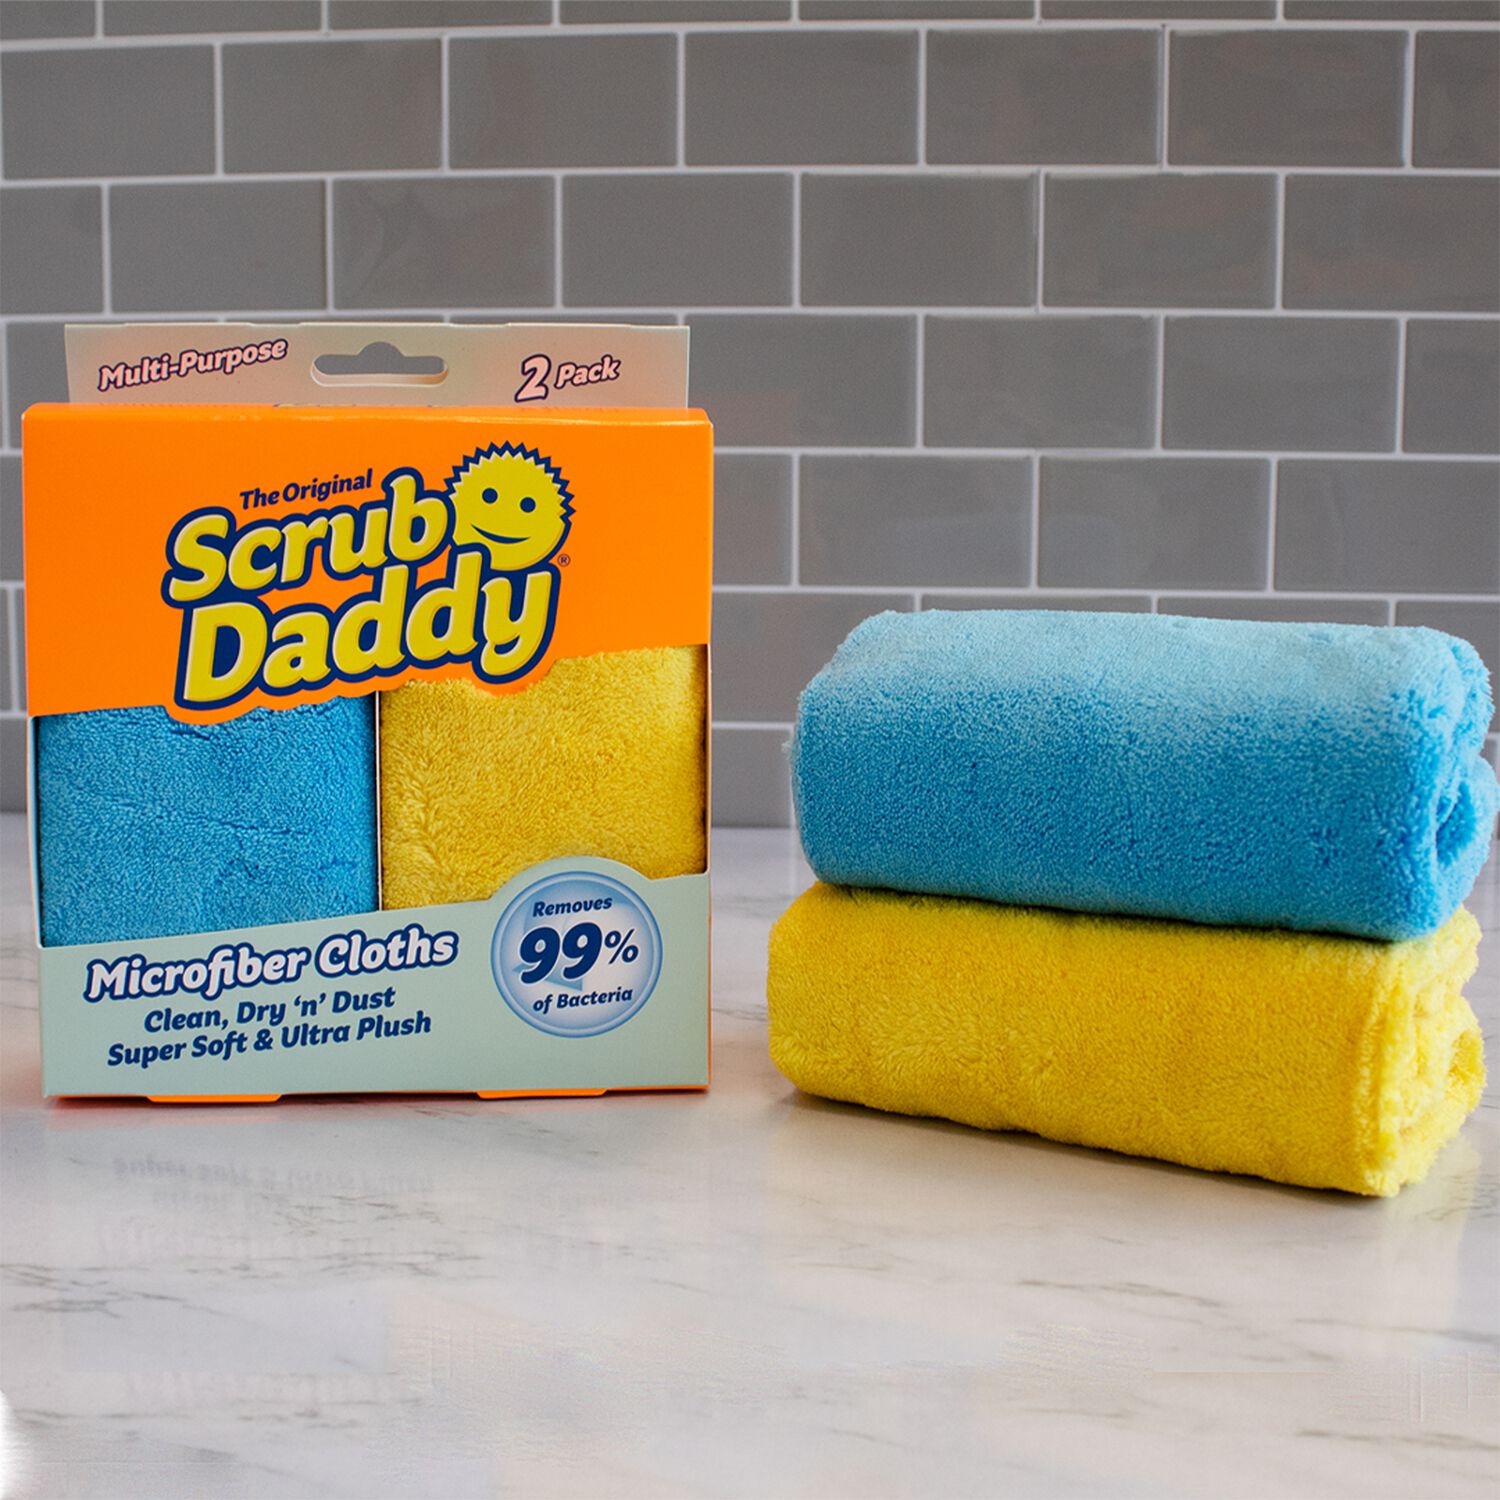 https://www.homestoreandmore.ie/dw/image/v2/BCBN_PRD/on/demandware.static/-/Sites-master/default/dw7a482a5e/images/Scrub-Daddy-Microfibre-Twin-Pack-wipes-cloths-133158-hi-res-2.jpg?sw=1500